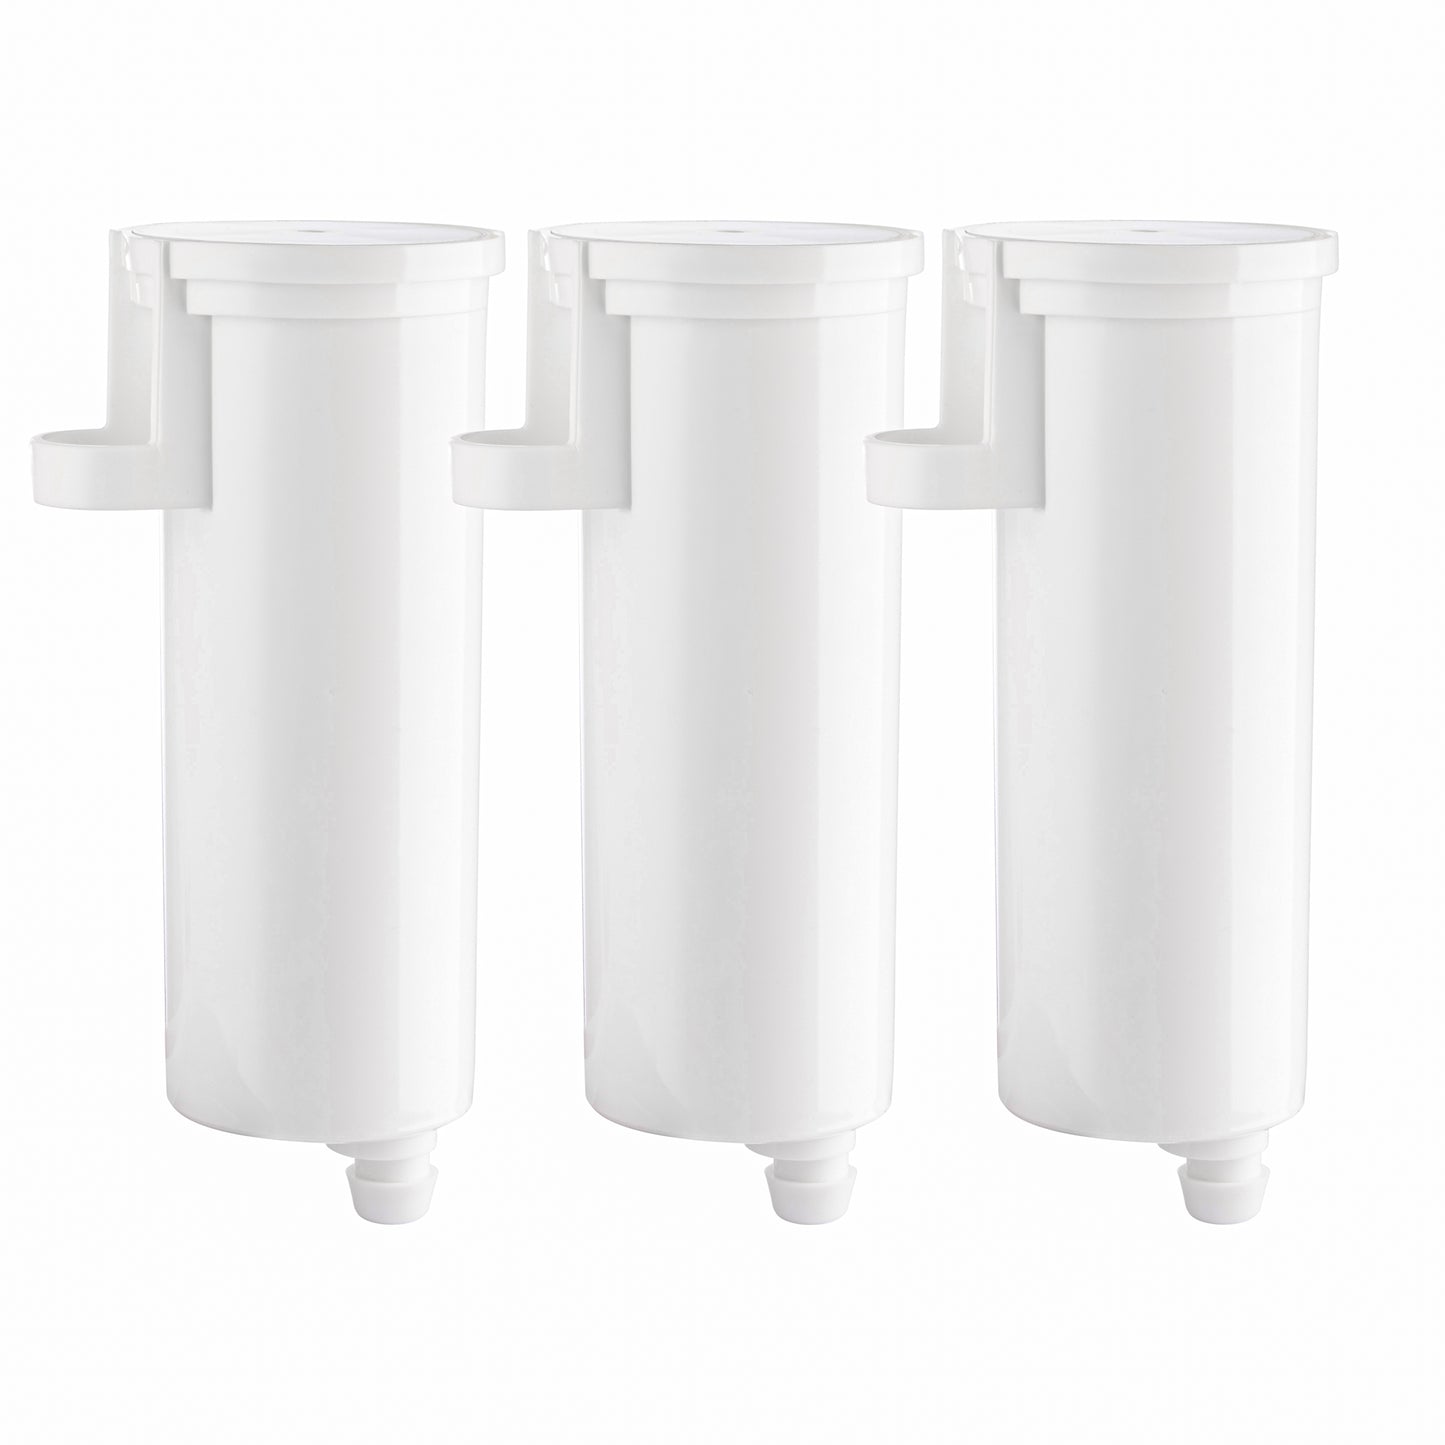 Mist Replacement for P4INKFILTR Ice Maker Water Filter, Compatible with all GE- Opal Nugget Ice Maker Water Filter, Easy to Install with Pull Ring Design, 3 Pack